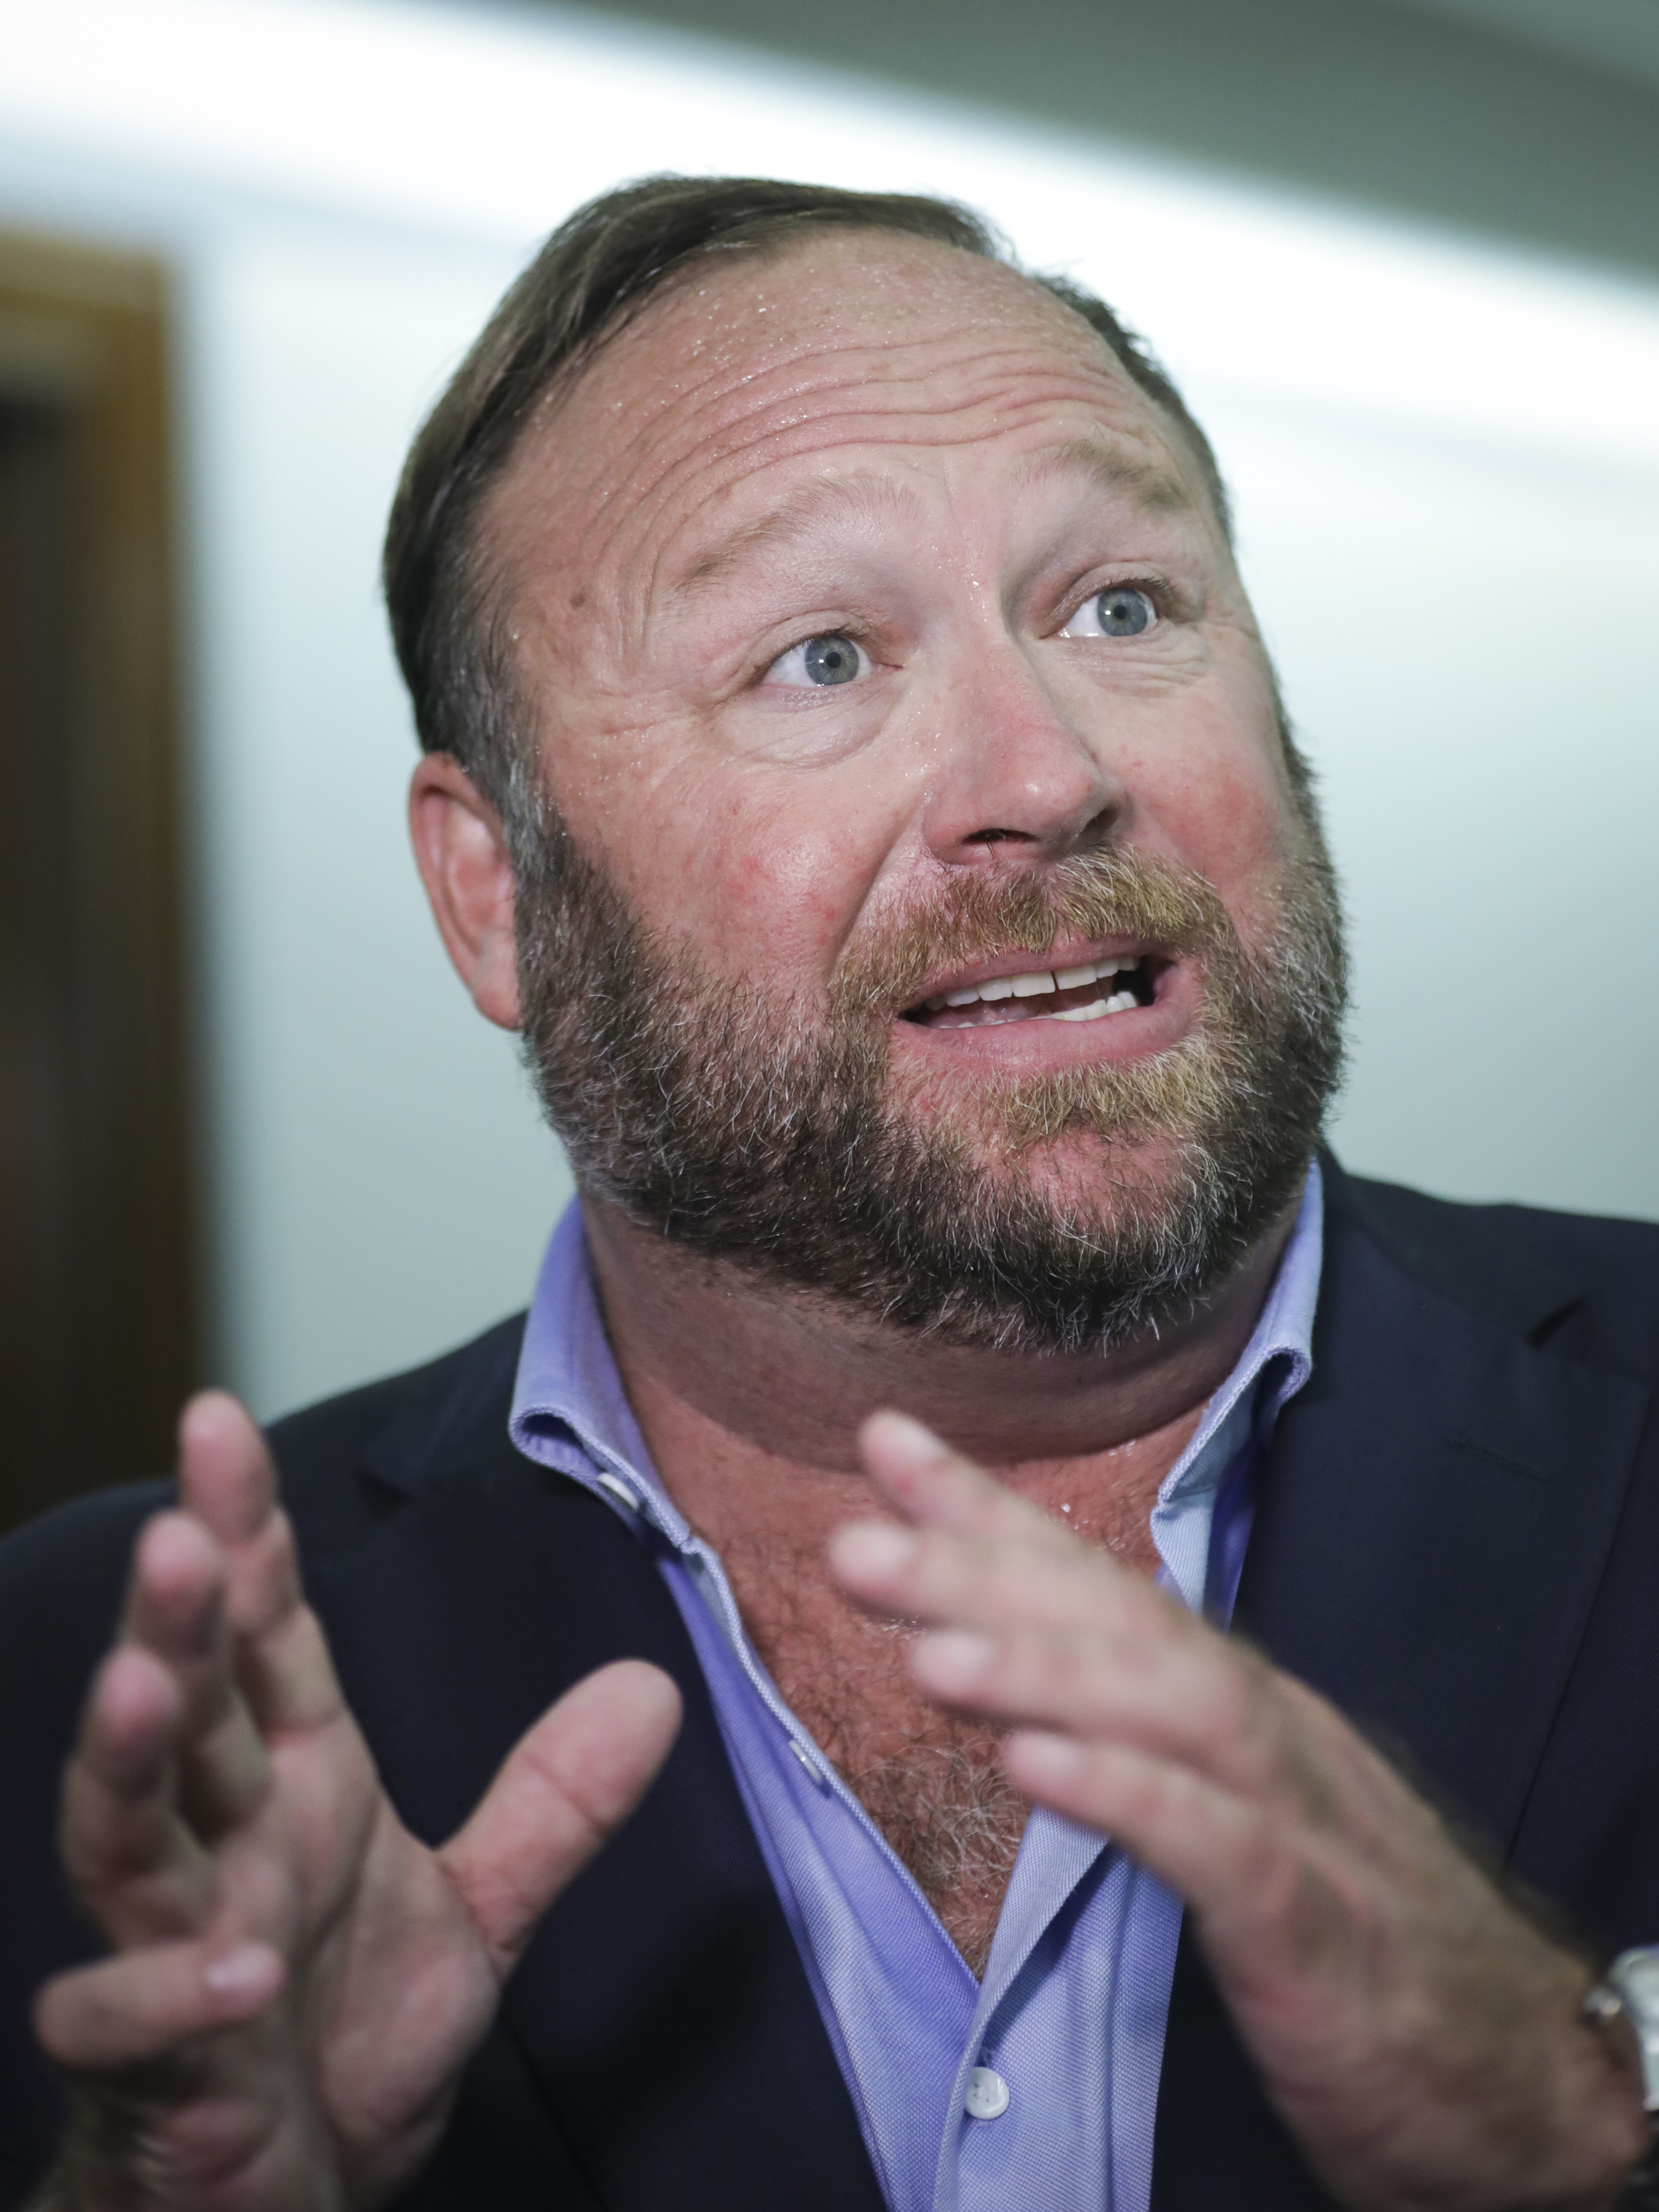 Alex Jones talks to reporters outside a Senate Intelligence Committee hearing concerning foreign influence operations' use of social media platforms, on Capitol Hill, September 5, 2018, in Washington, DC. | Source: Getty Images